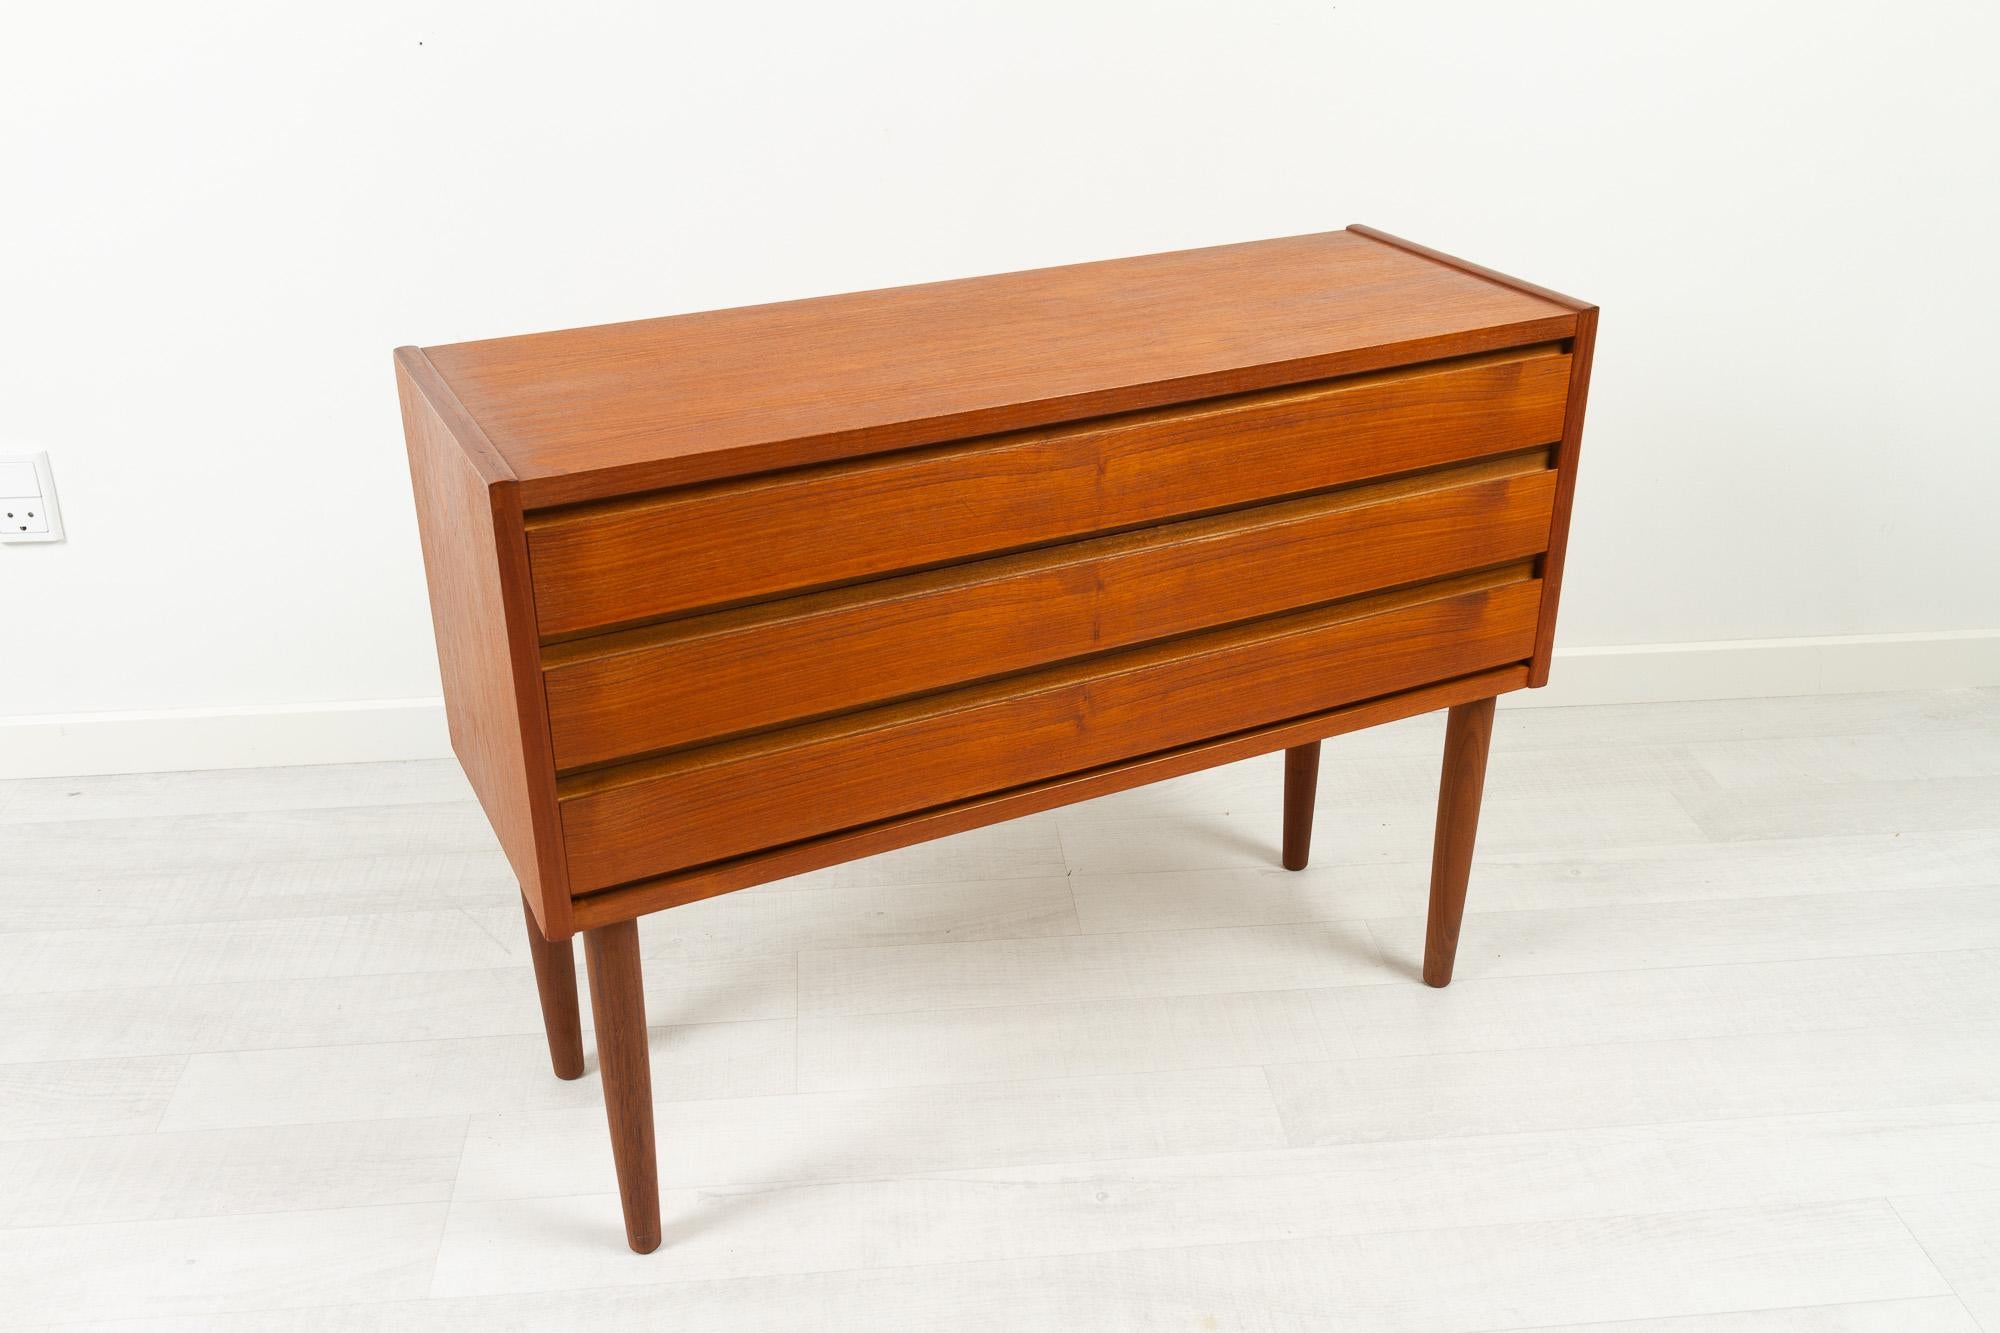 Vintage Danish modern teak dresser, 1960s.
Elegant wide and low Danish chest of drawers with three wide drawers with recessed pulls. Standing on four round tapered legs. Beautiful teak veneer with nice grain pattern.
Very good condition. Drawers